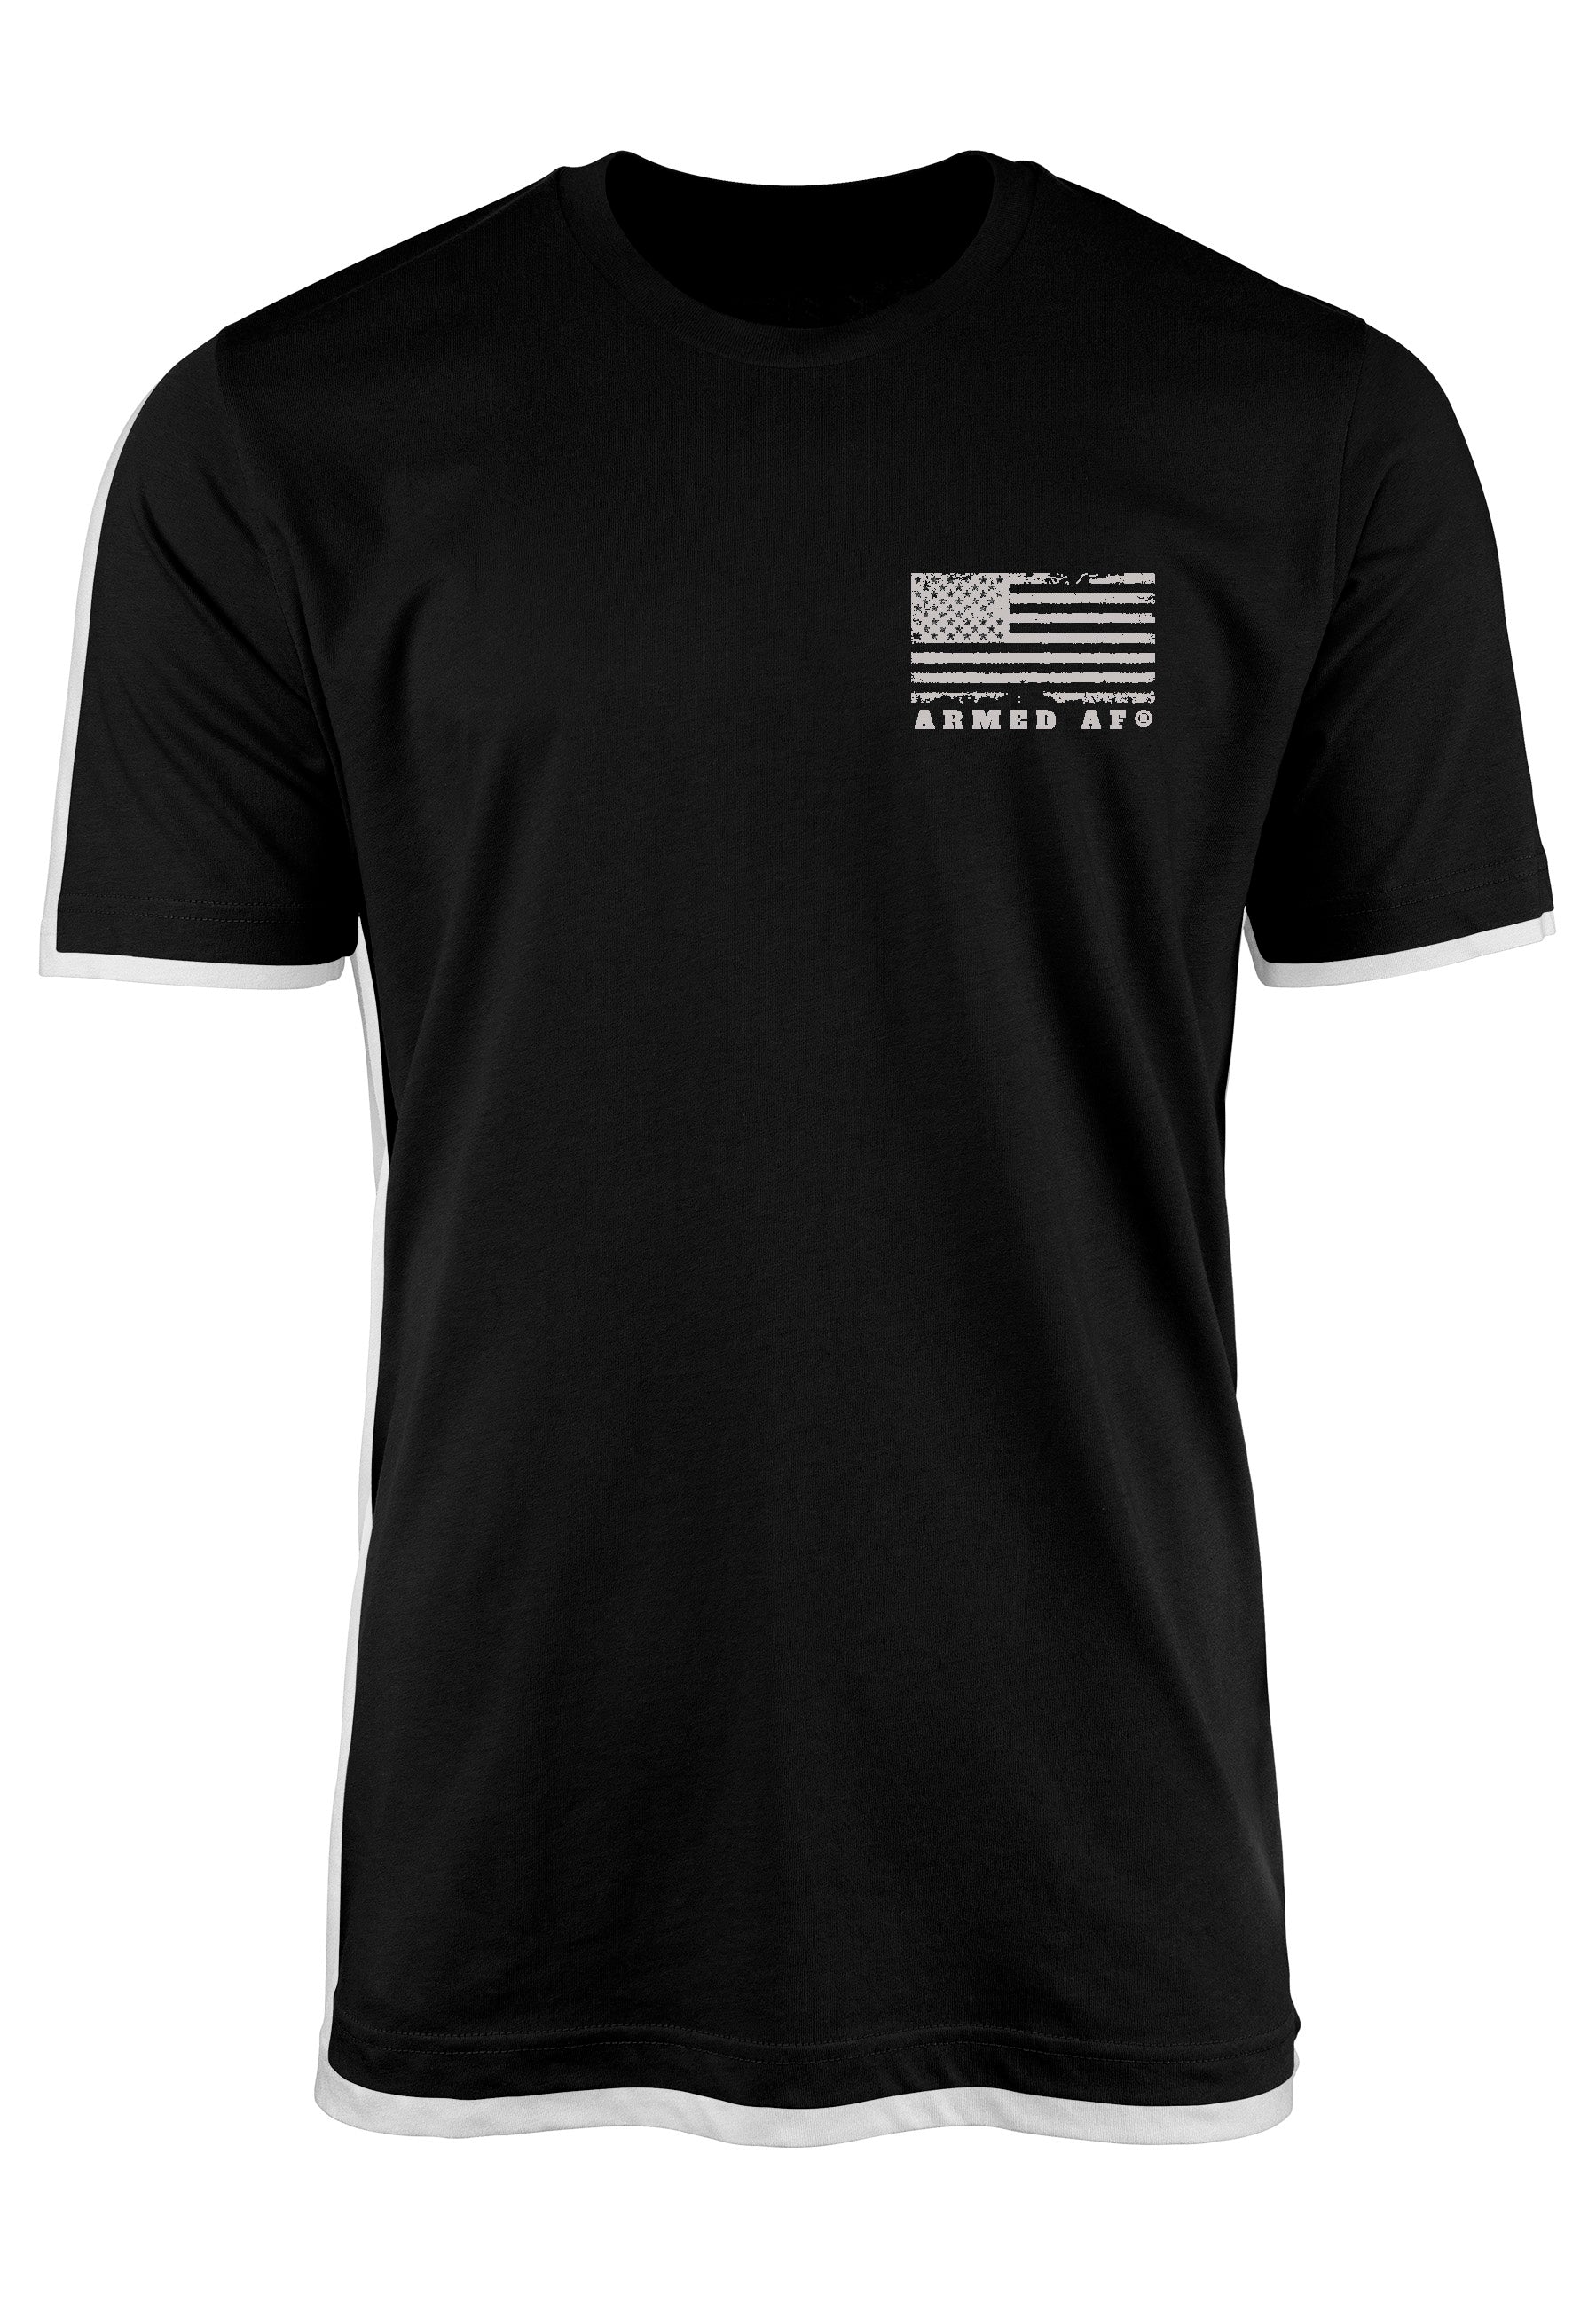 Chest print on t-shirt from Armed AF brand